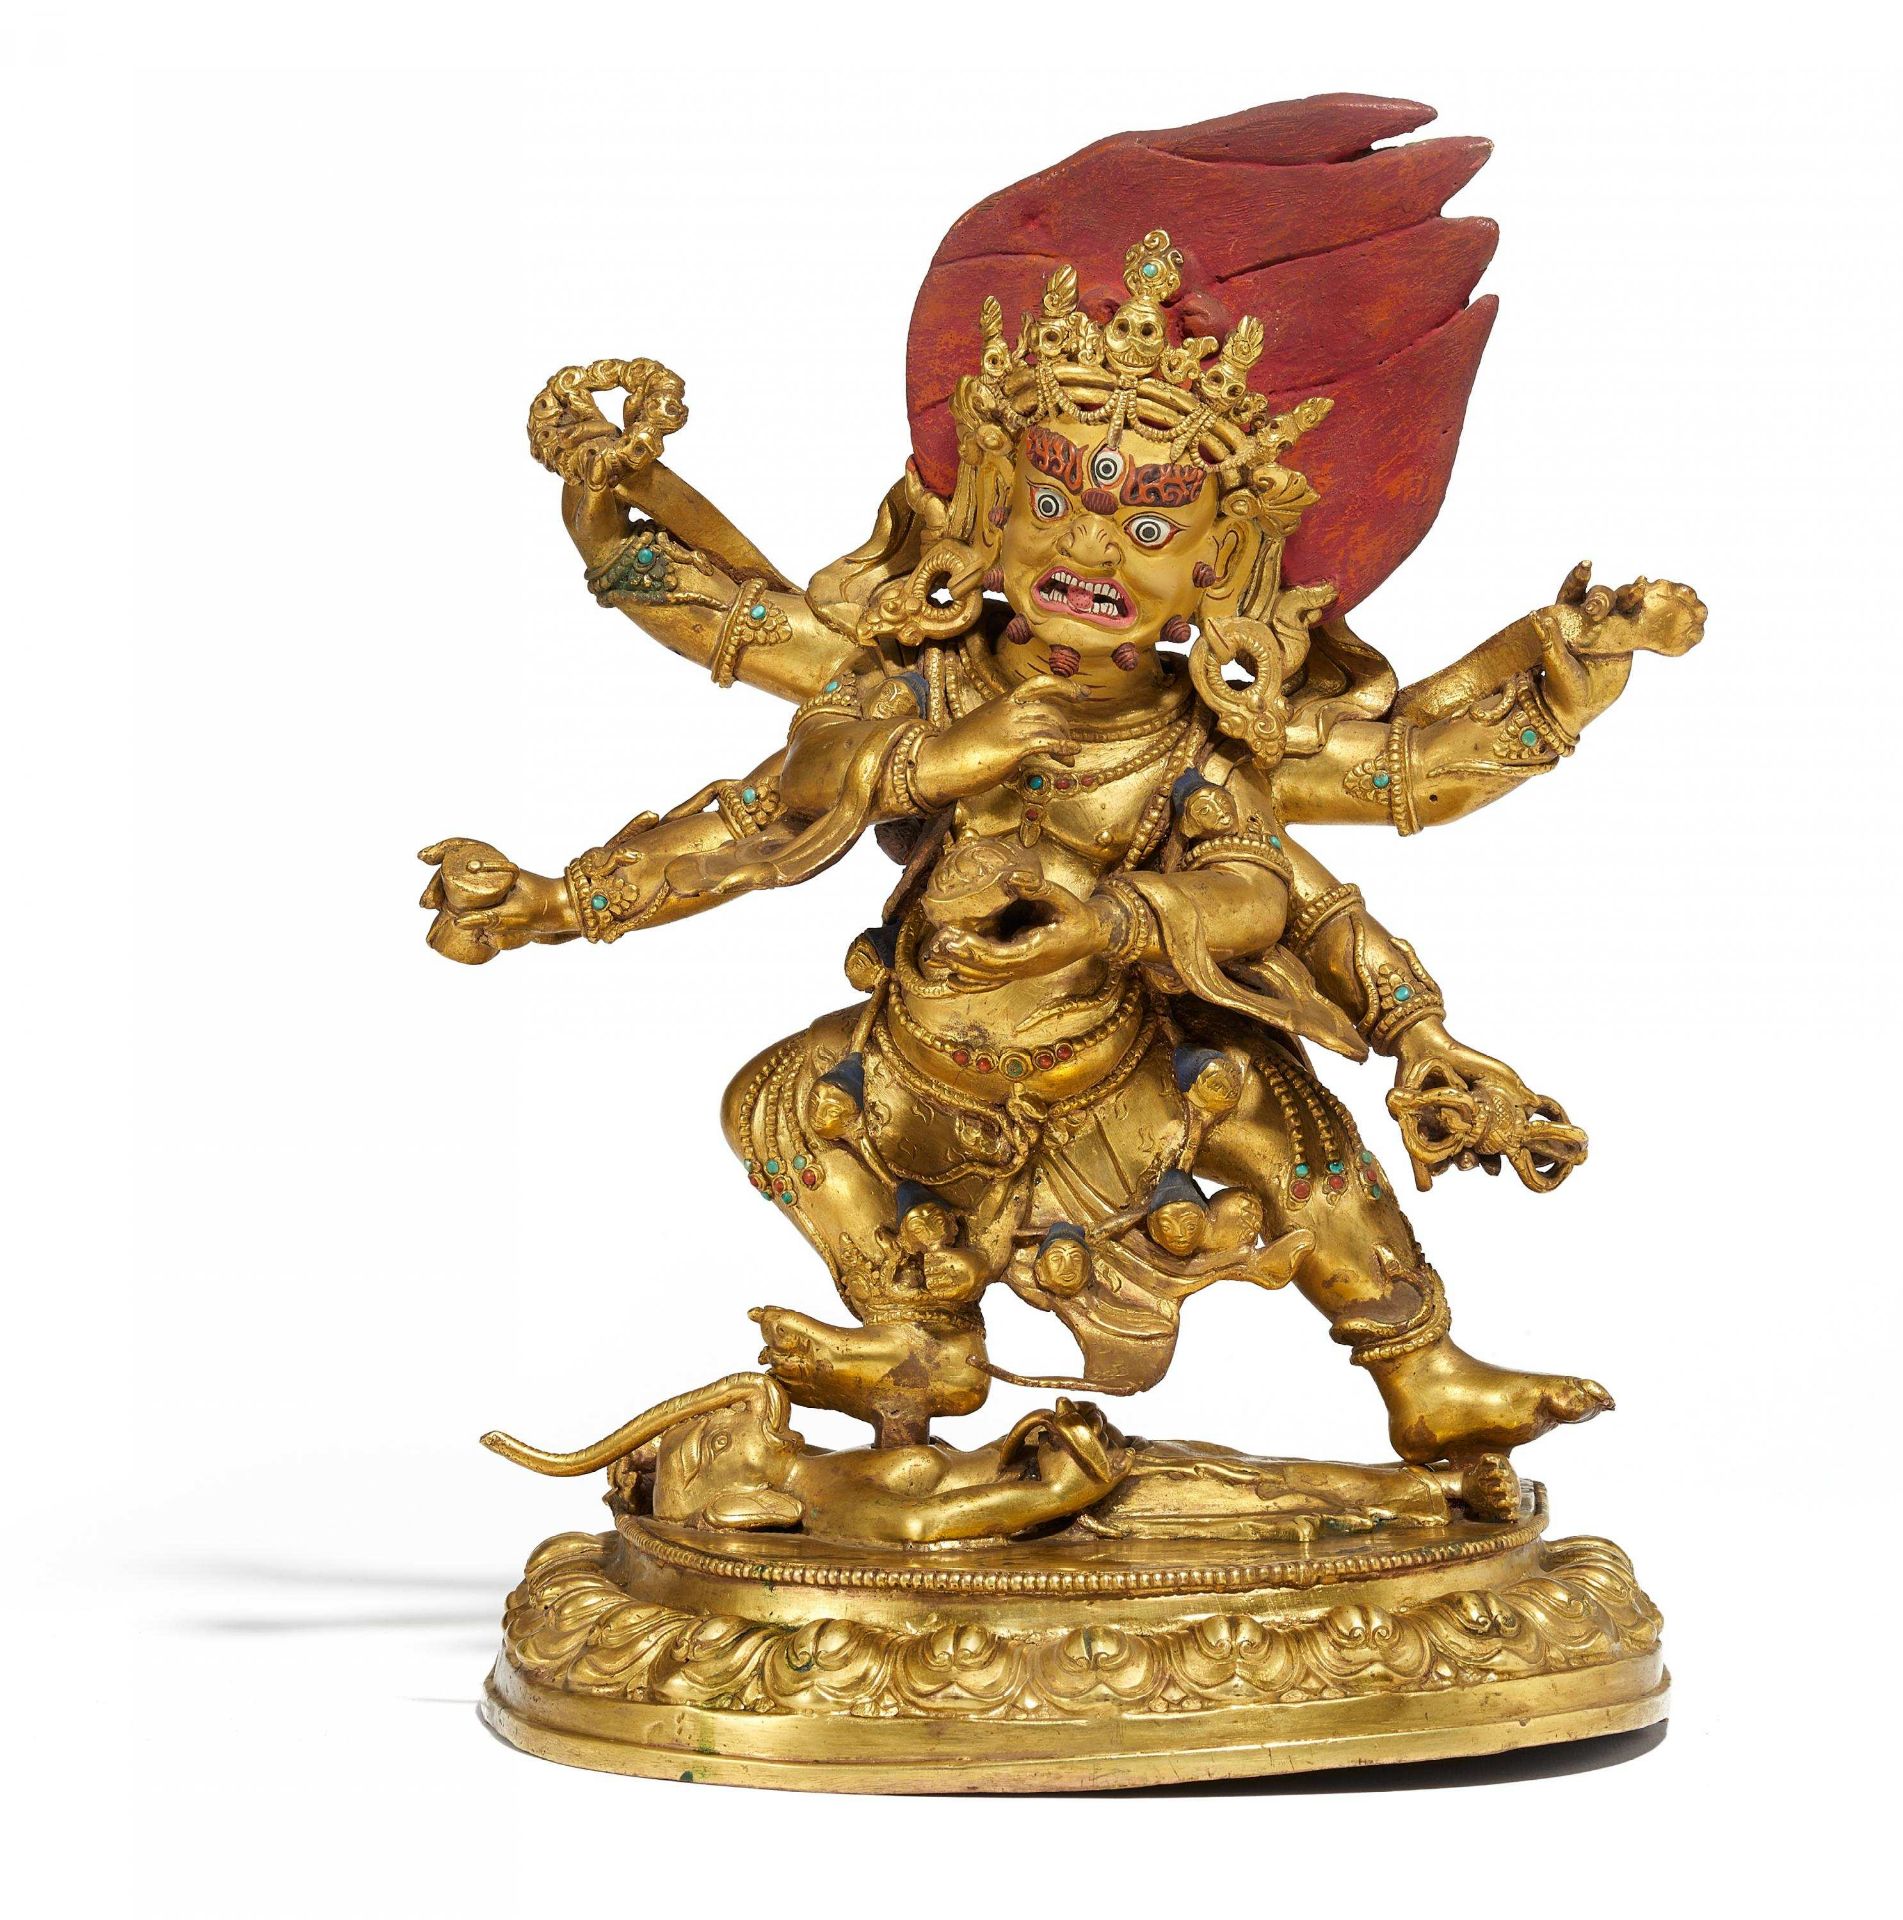 TALL SHADBHUJA MAHAKALA. Tibet. Brass, fire gilt, with gold and pigment painting and inlayed with